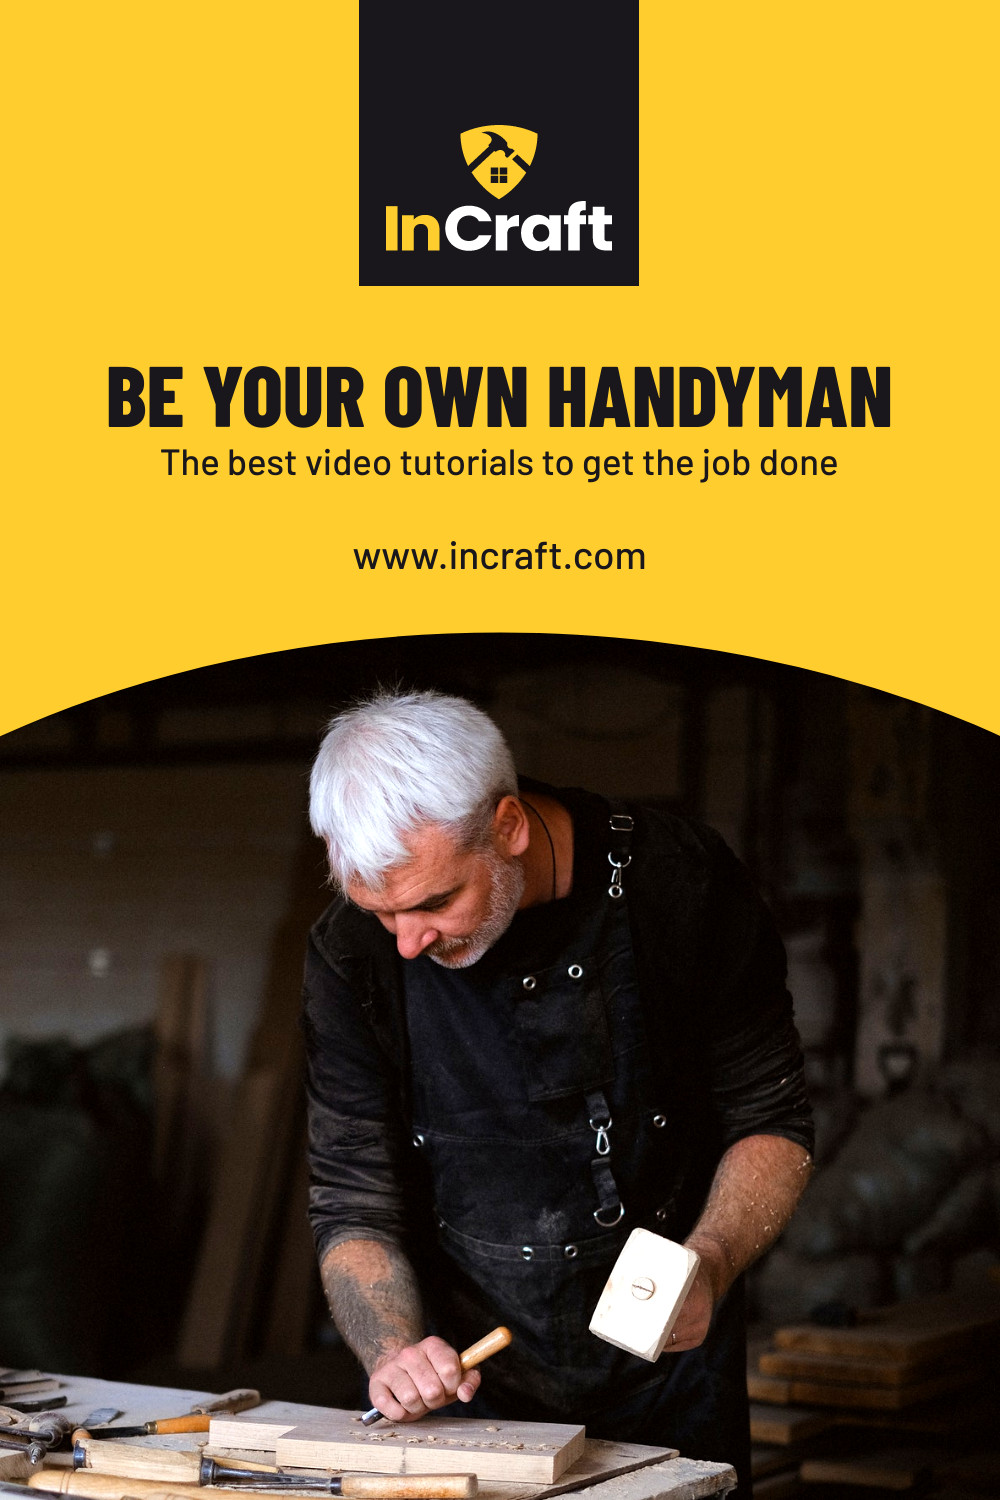 Be Your Own Handyman Facebook Cover 820x360